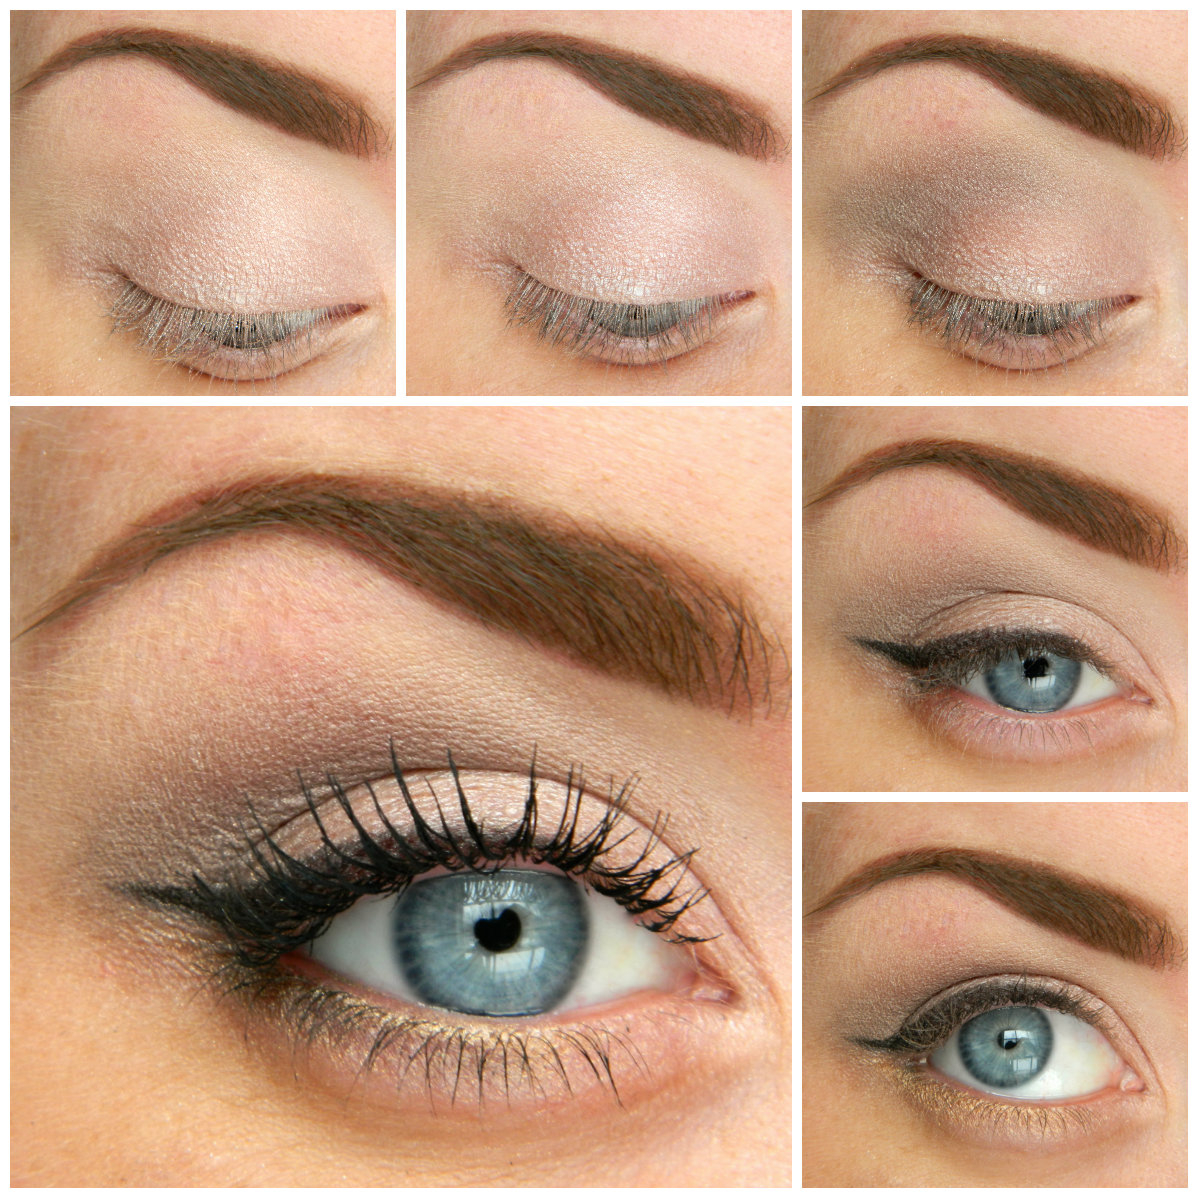 Makeup For Homecoming For Brown Eyes 5 Ways To Make Blue Eyes Pop With Proper Eye Makeup Her Style Code